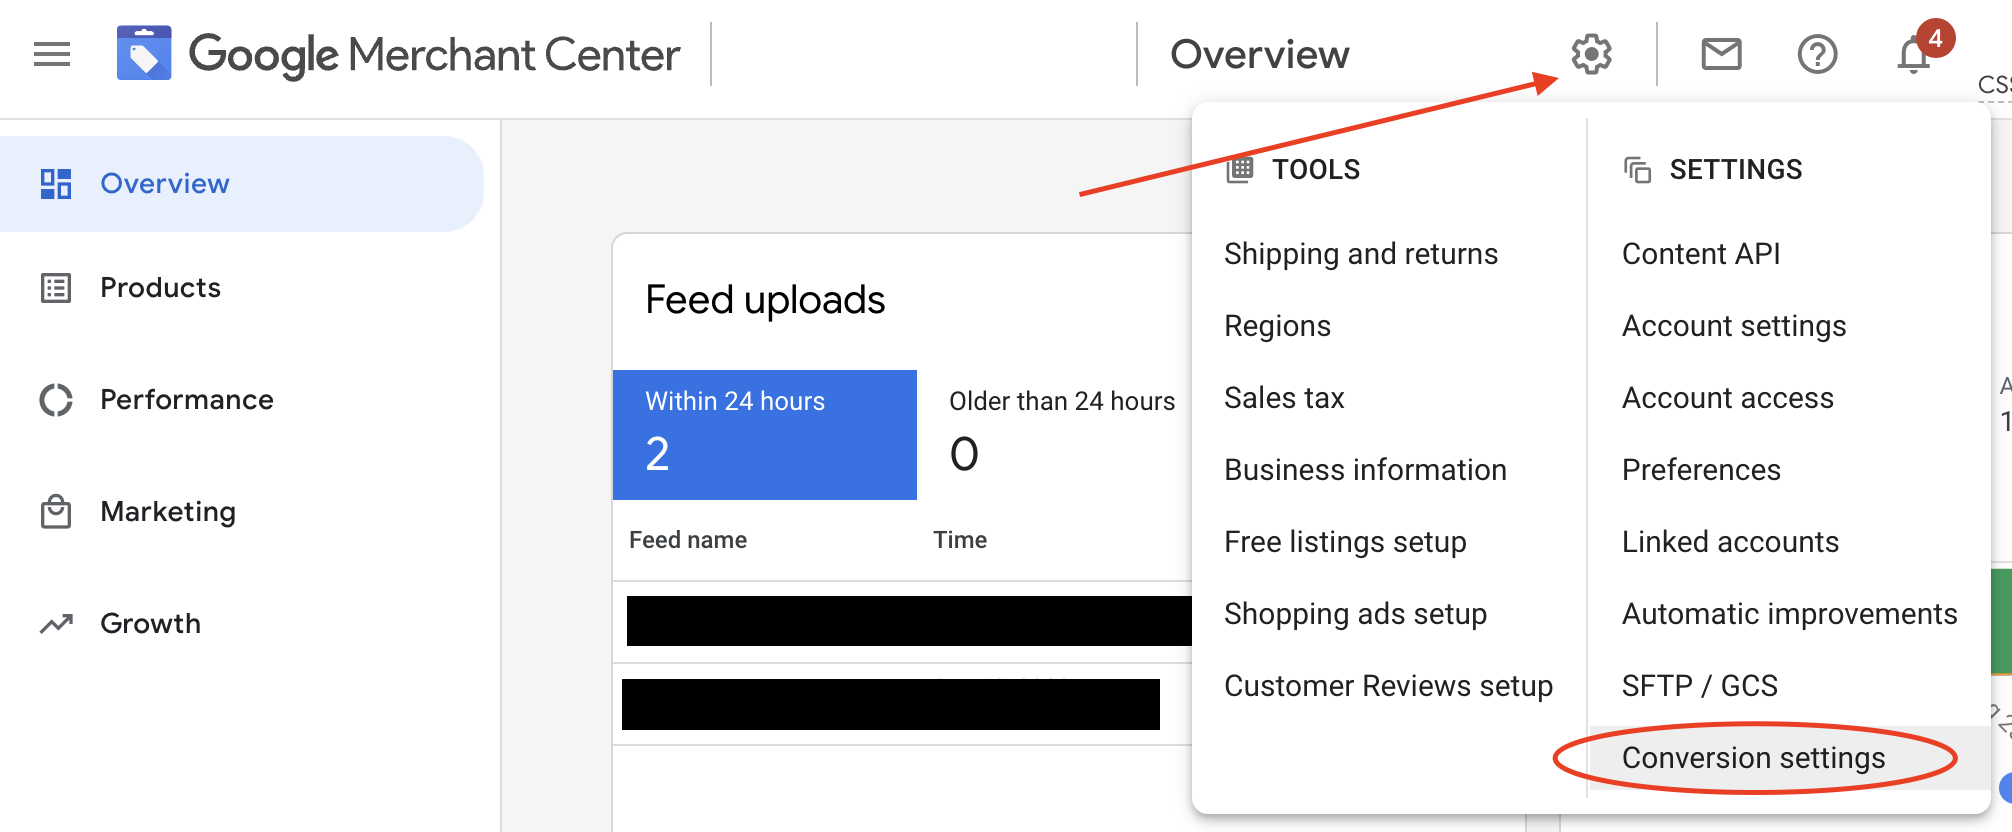 Screen shot of Tools and Settings menu in Google Merchant Center, annotated to indicate where to access Conversion settings by turning on Auto-tagging